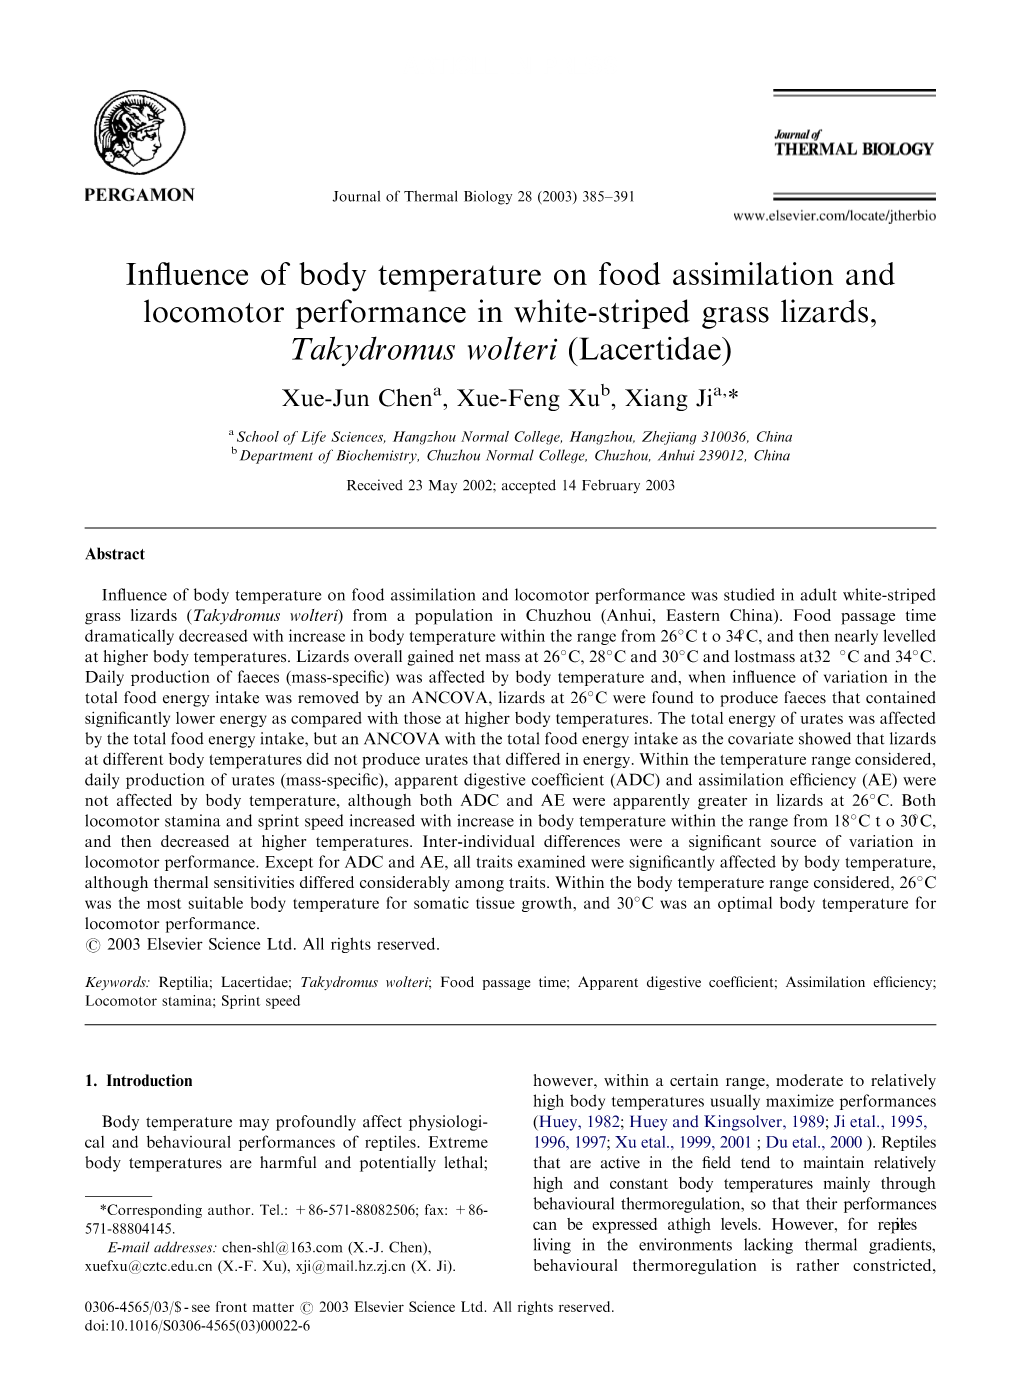 Influence of Body Temperature on Food Assimilation and Locomotor Performance in White-Striped Grass Lizards, Takydromus Wolteri